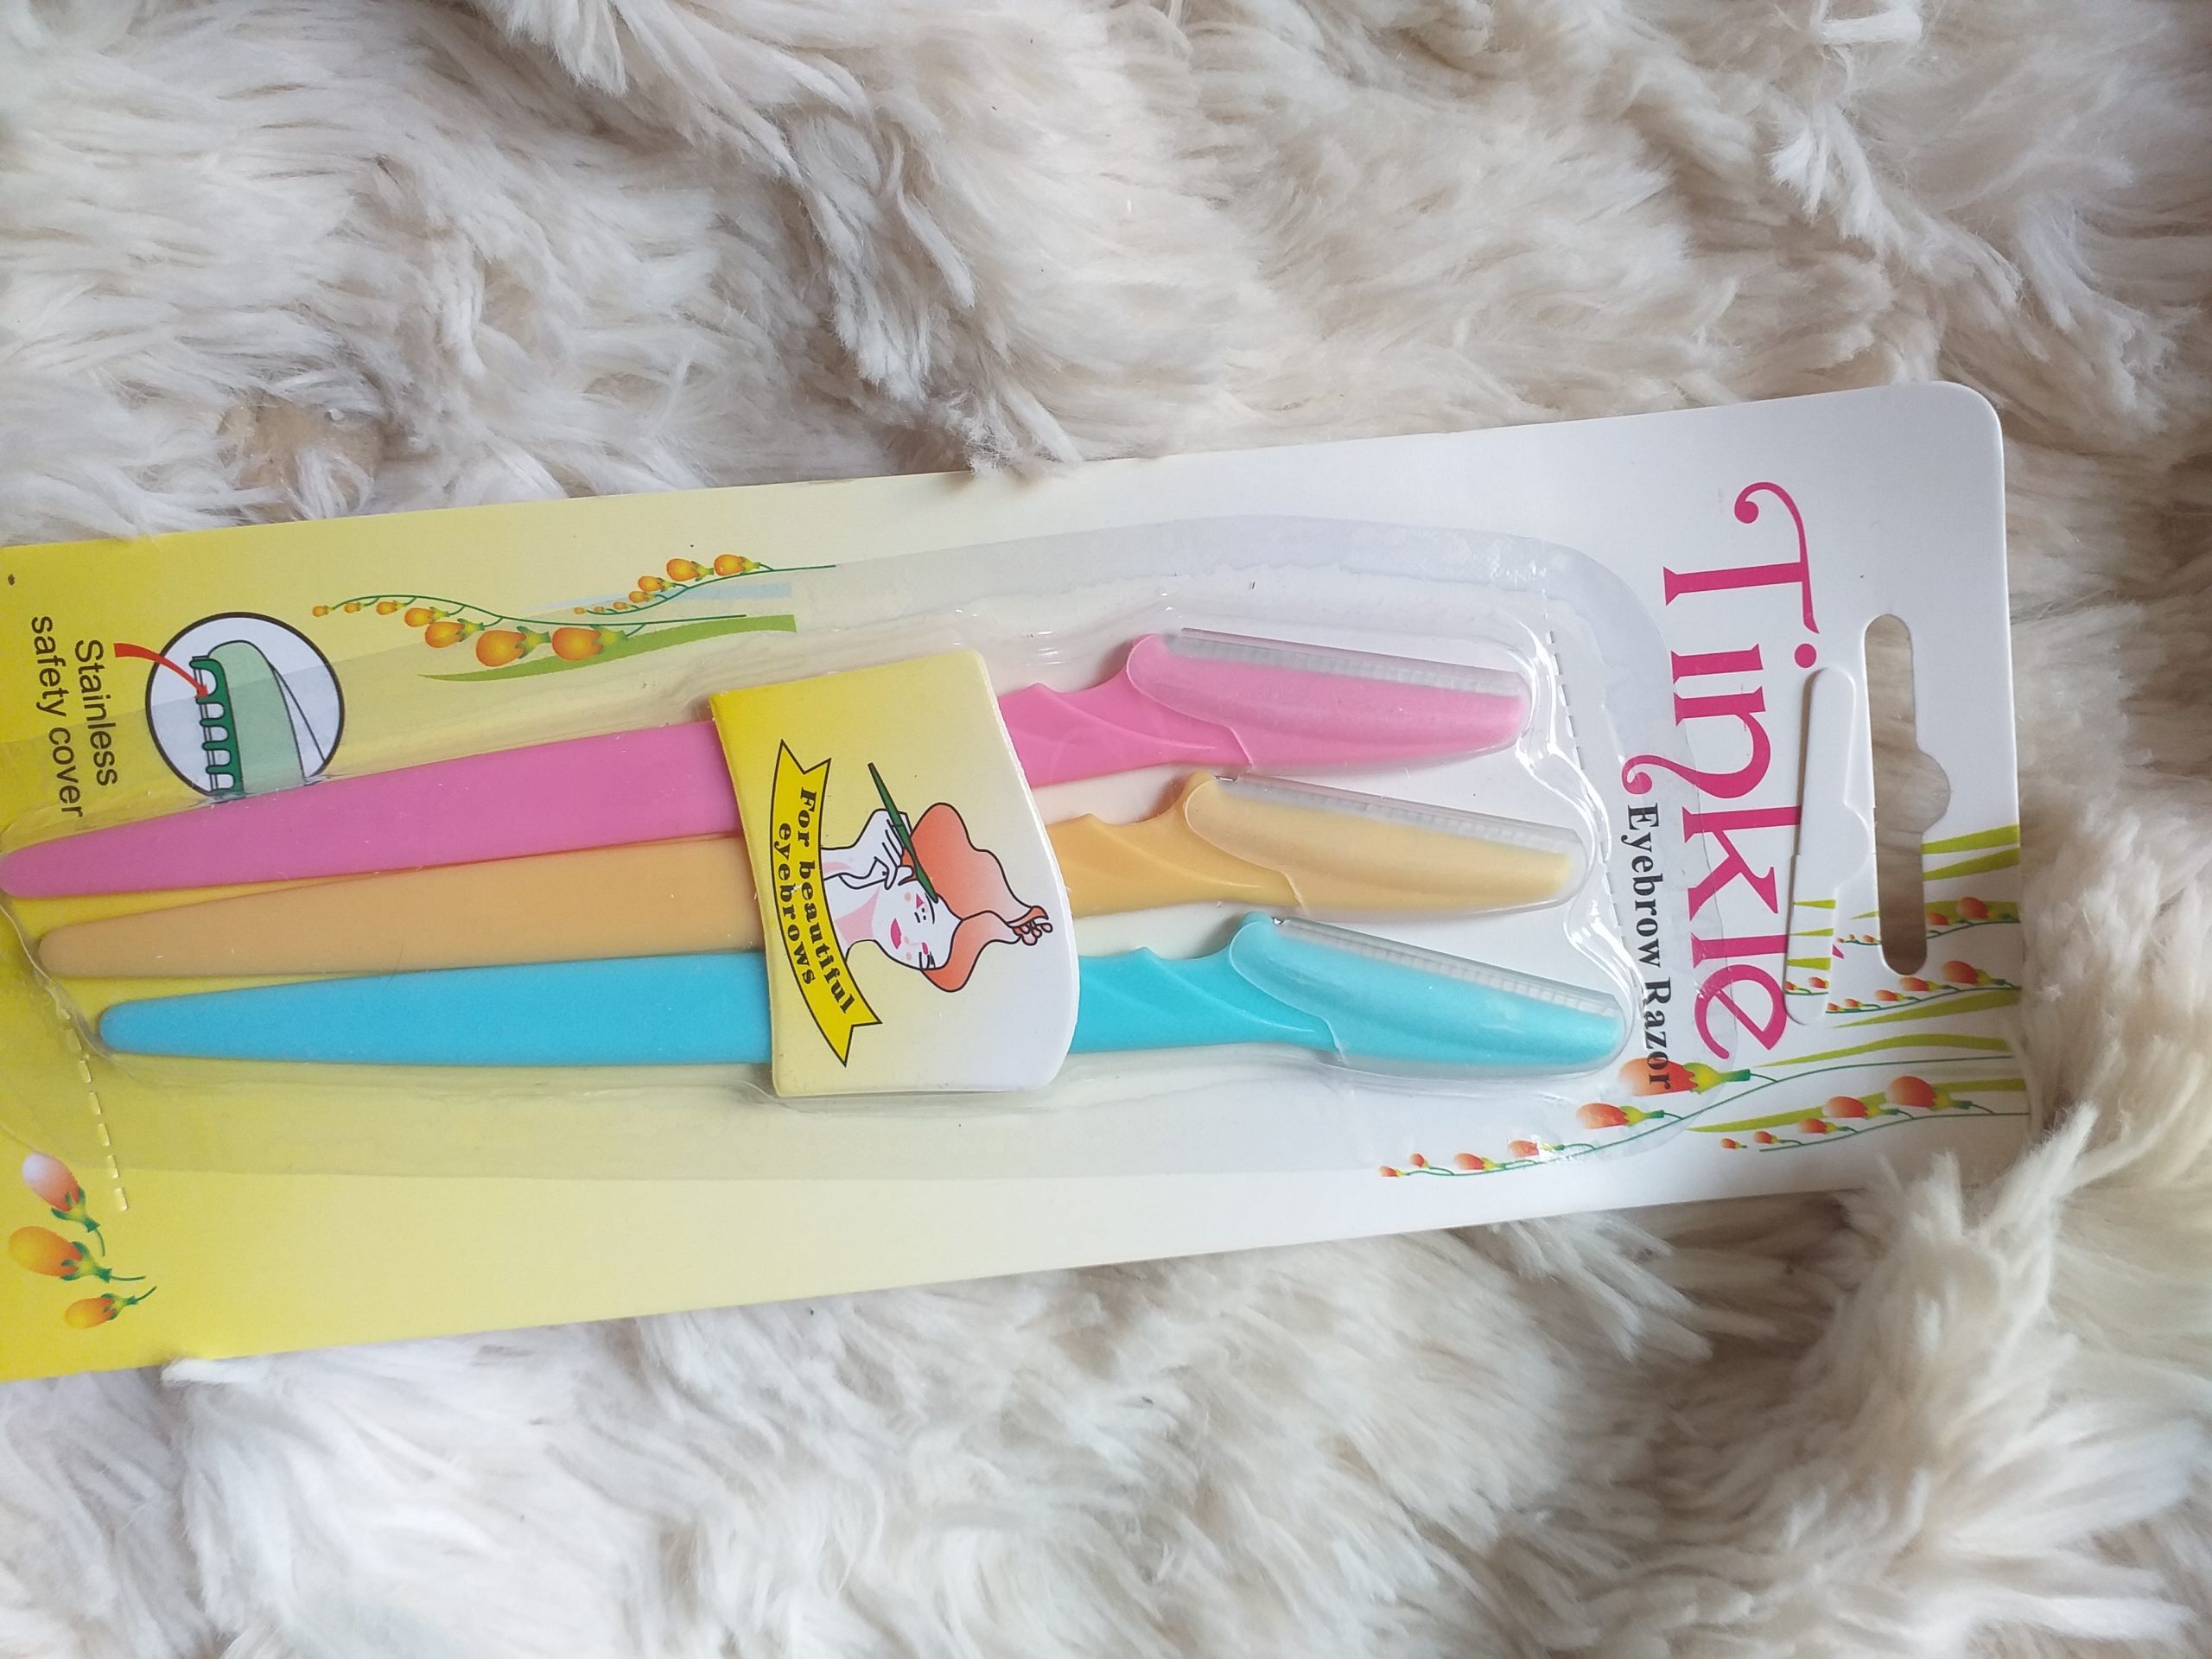 Tinkle razors – Affordable Makeup in Pakistan